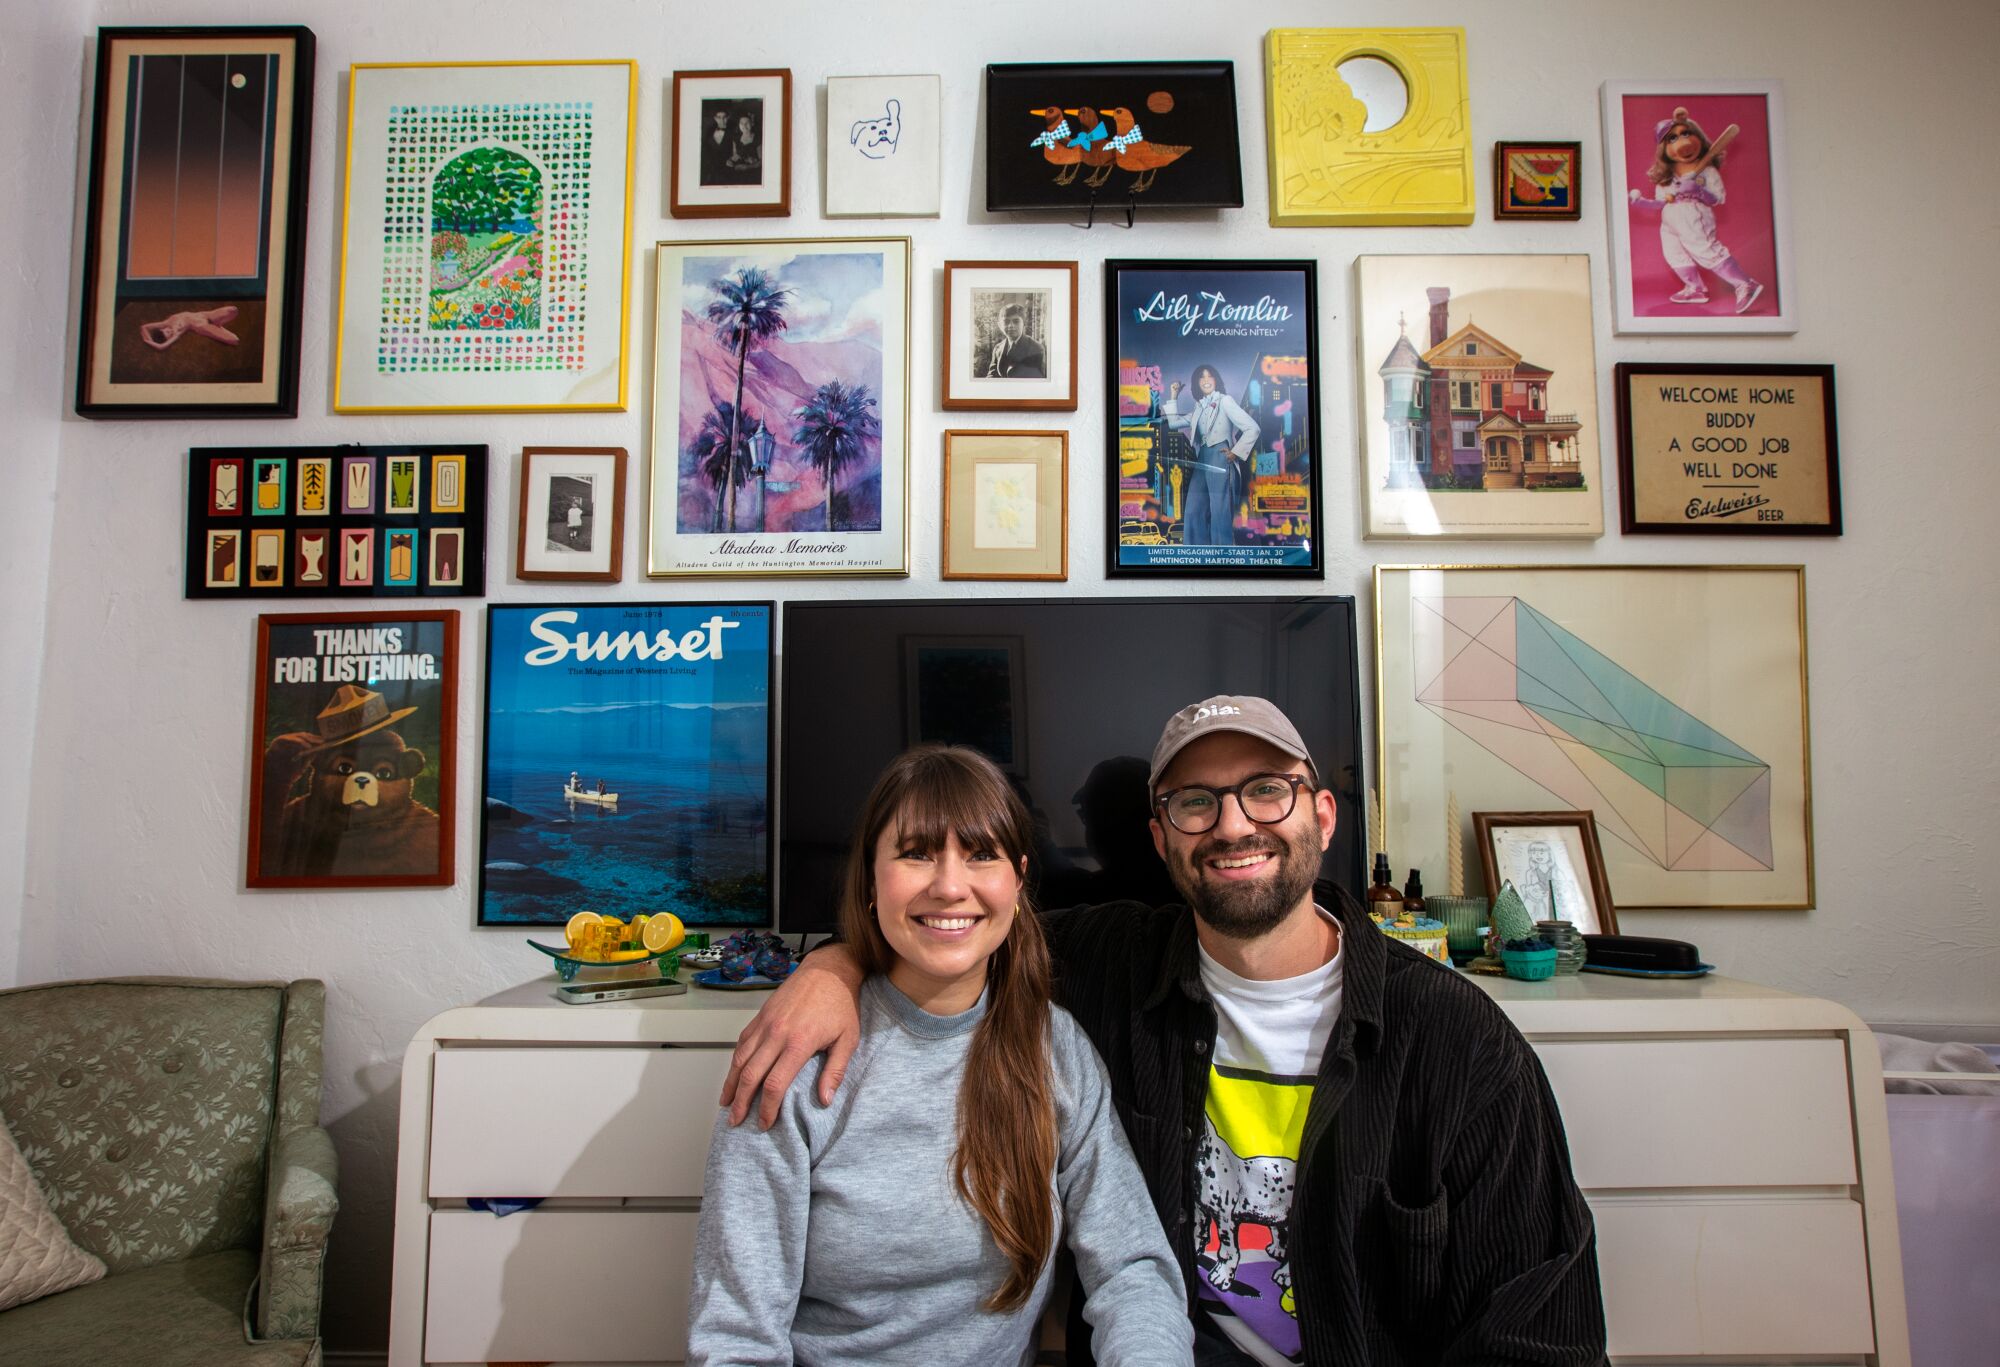 Amy Solomon and her boyfriend Greg Kestenbaum sitting together in front of a gallery wall.